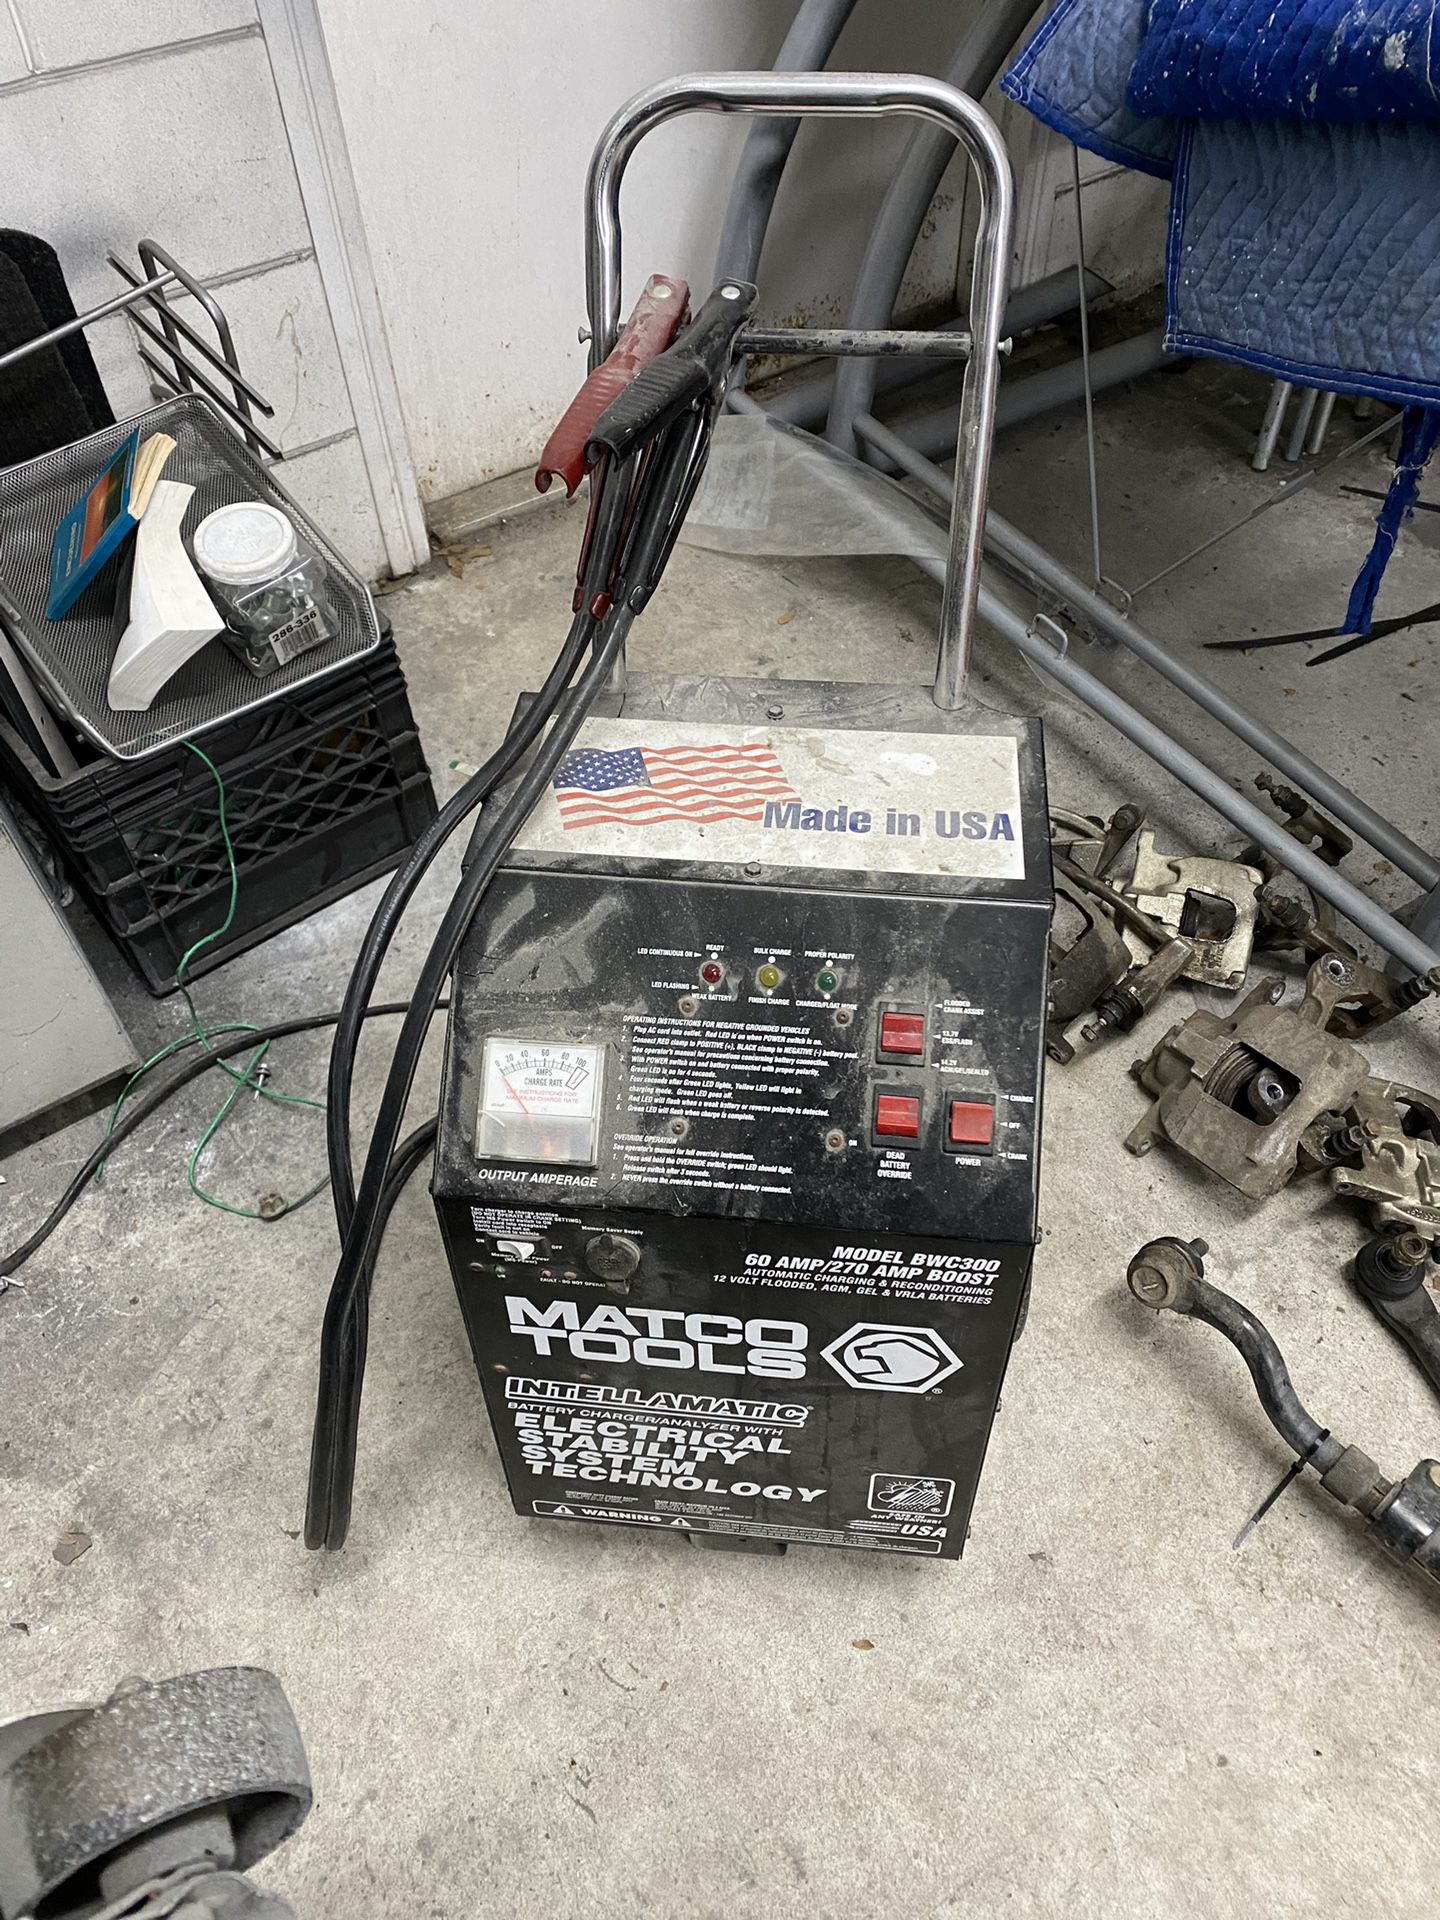 Matco Tools Battery Charger & Starter for Sale in St. Cloud, FL - OfferUp